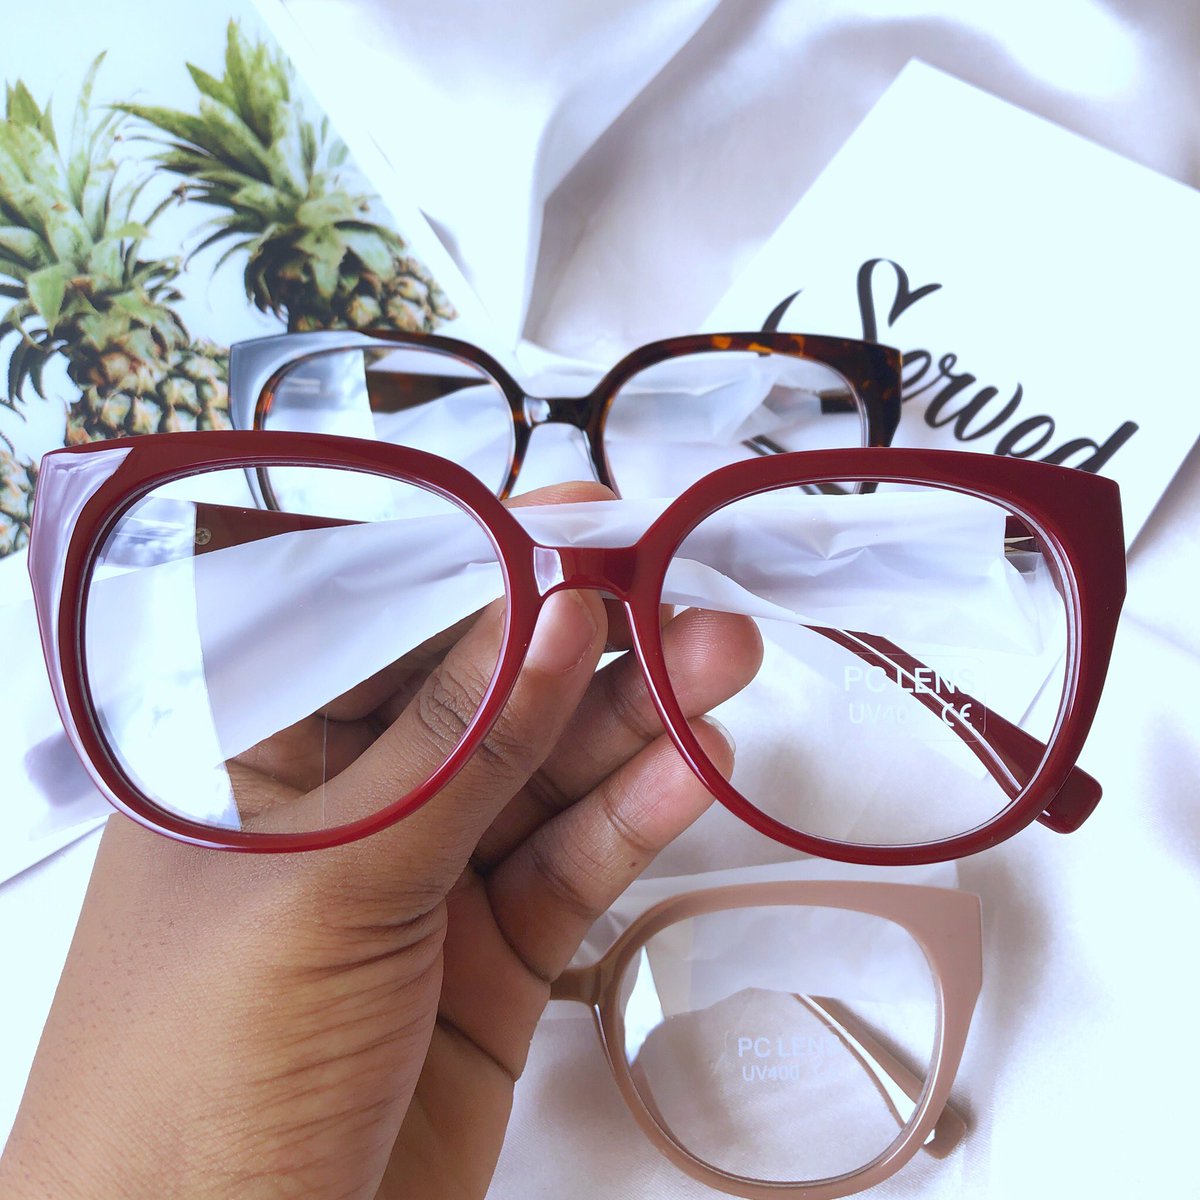 WEEKEND DEAL!!!Prescription frame Price : #,3000 each 2 for #5,000Available for delivery Send a dm to order.Pls help Rt